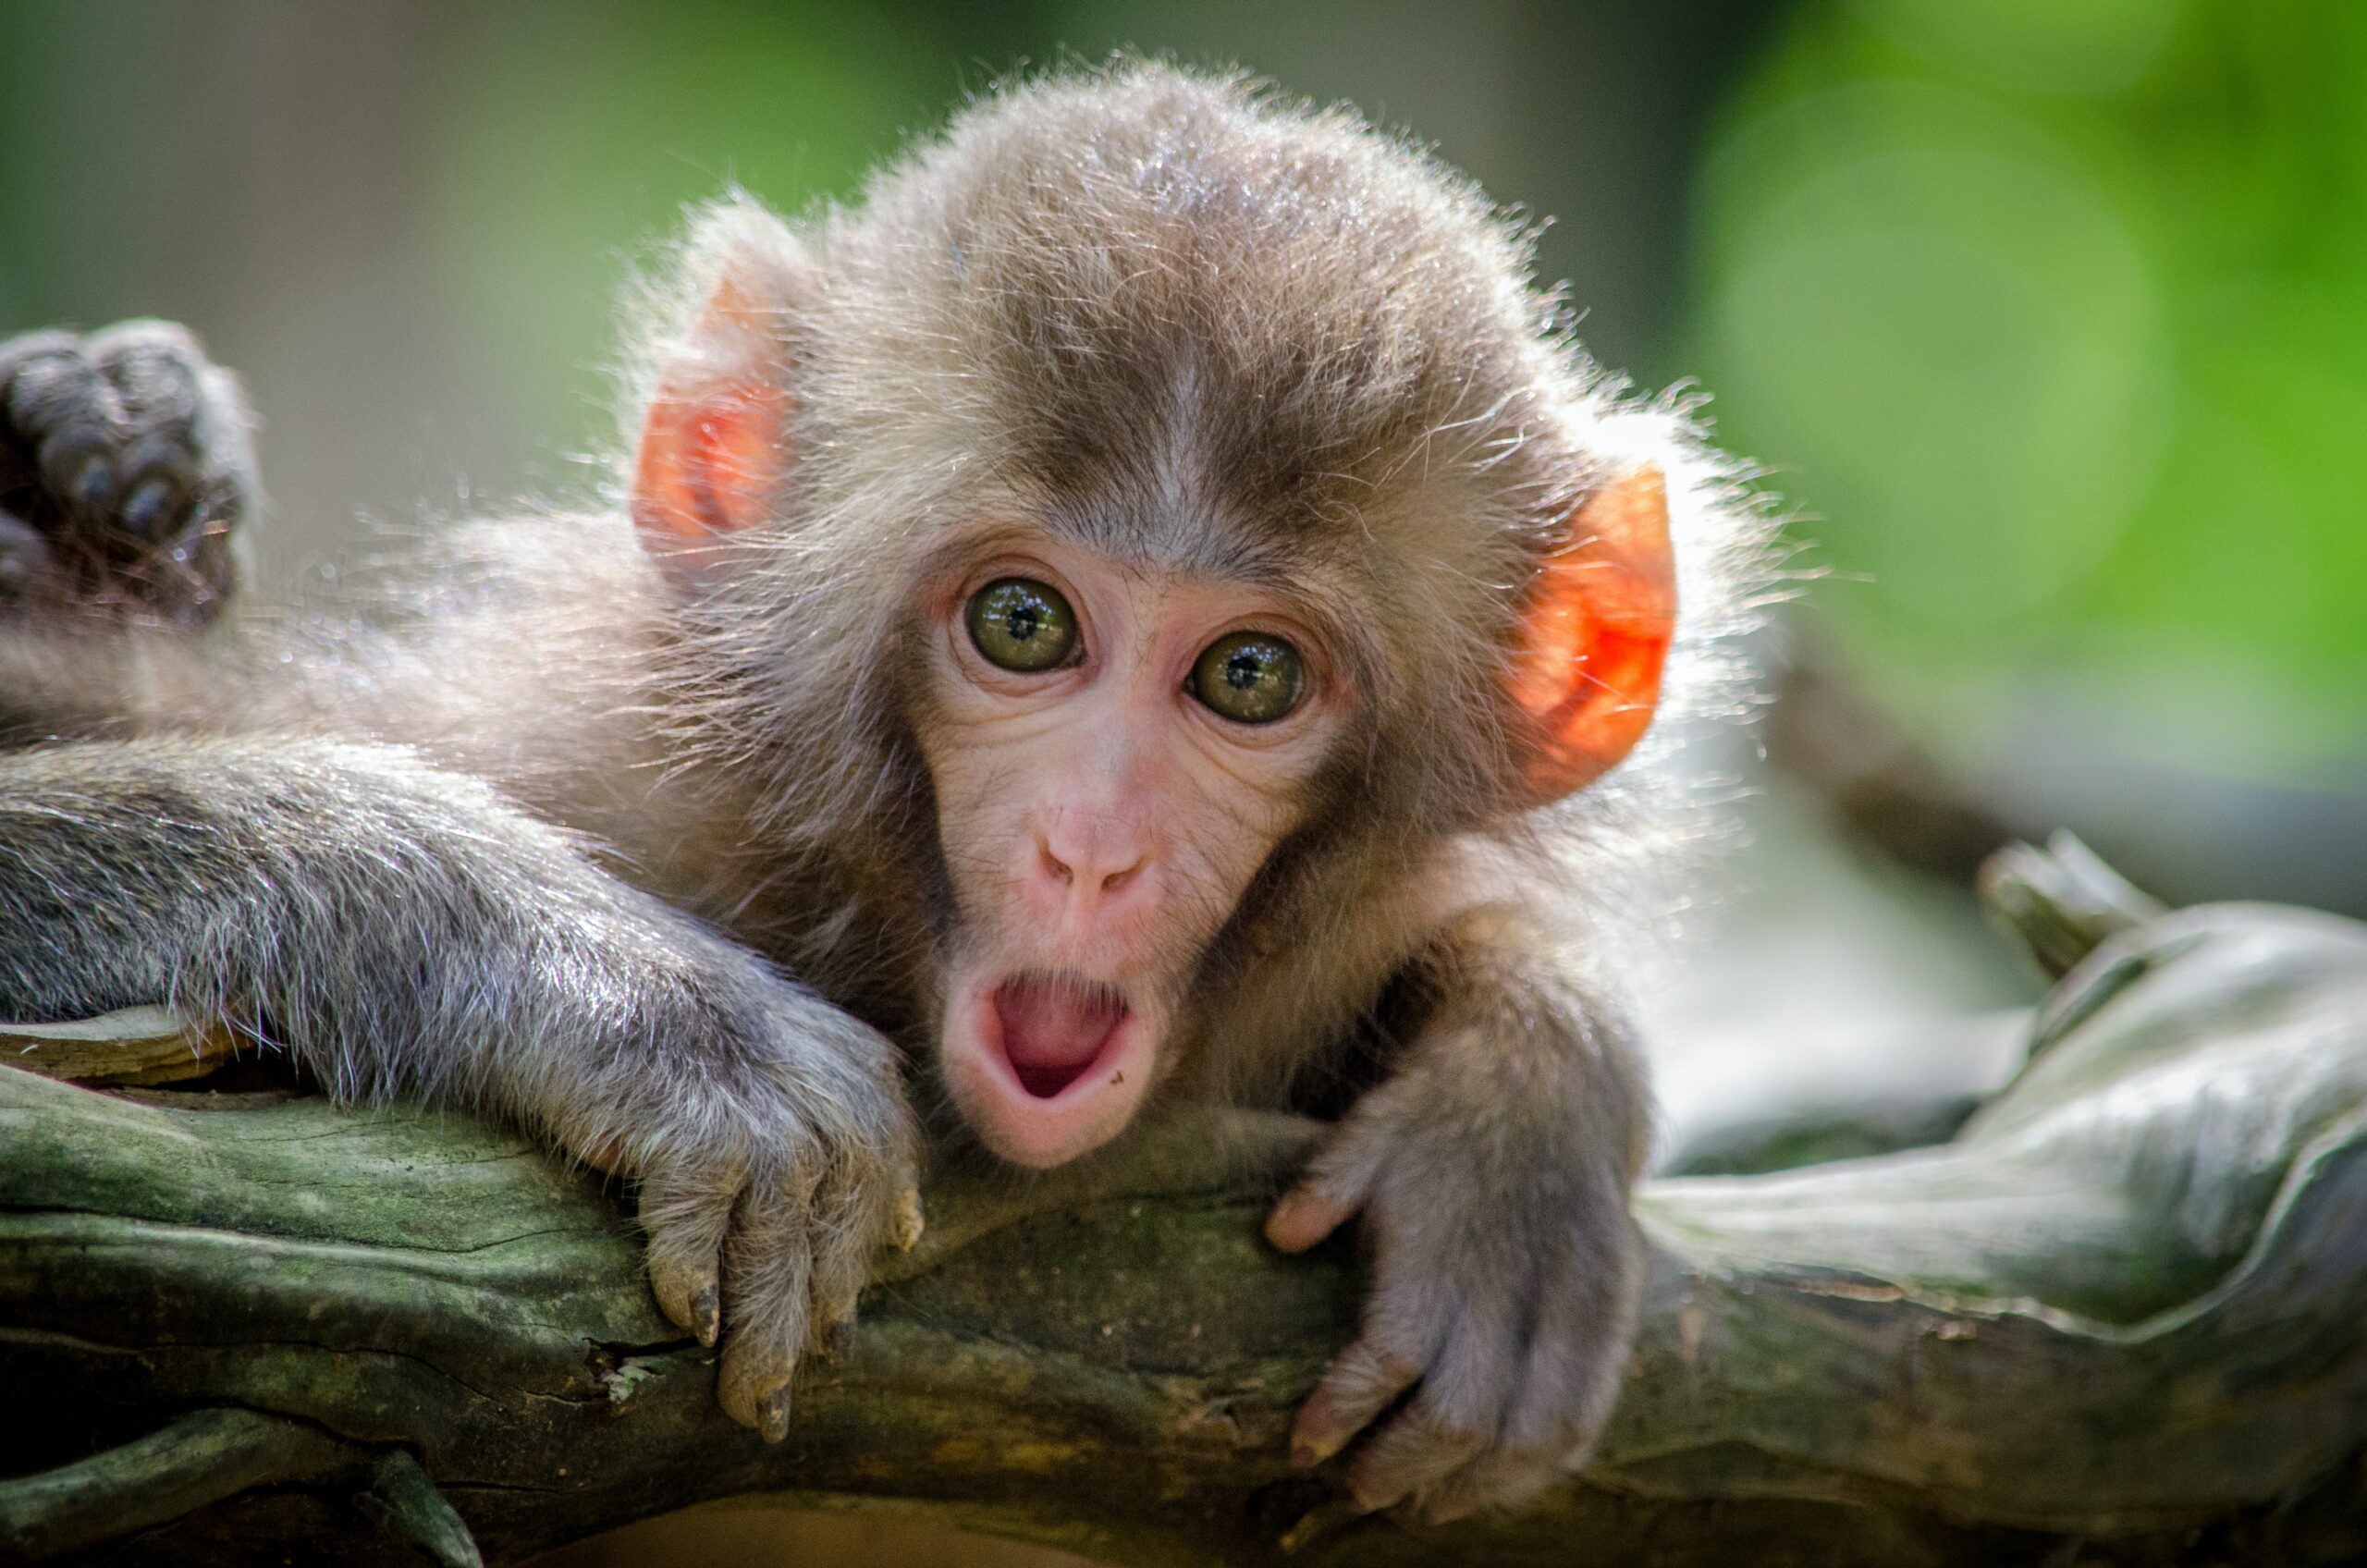 Picture of a surprised or excited monkey by jamie-haughton-Z05GiksmqYU-unsplash